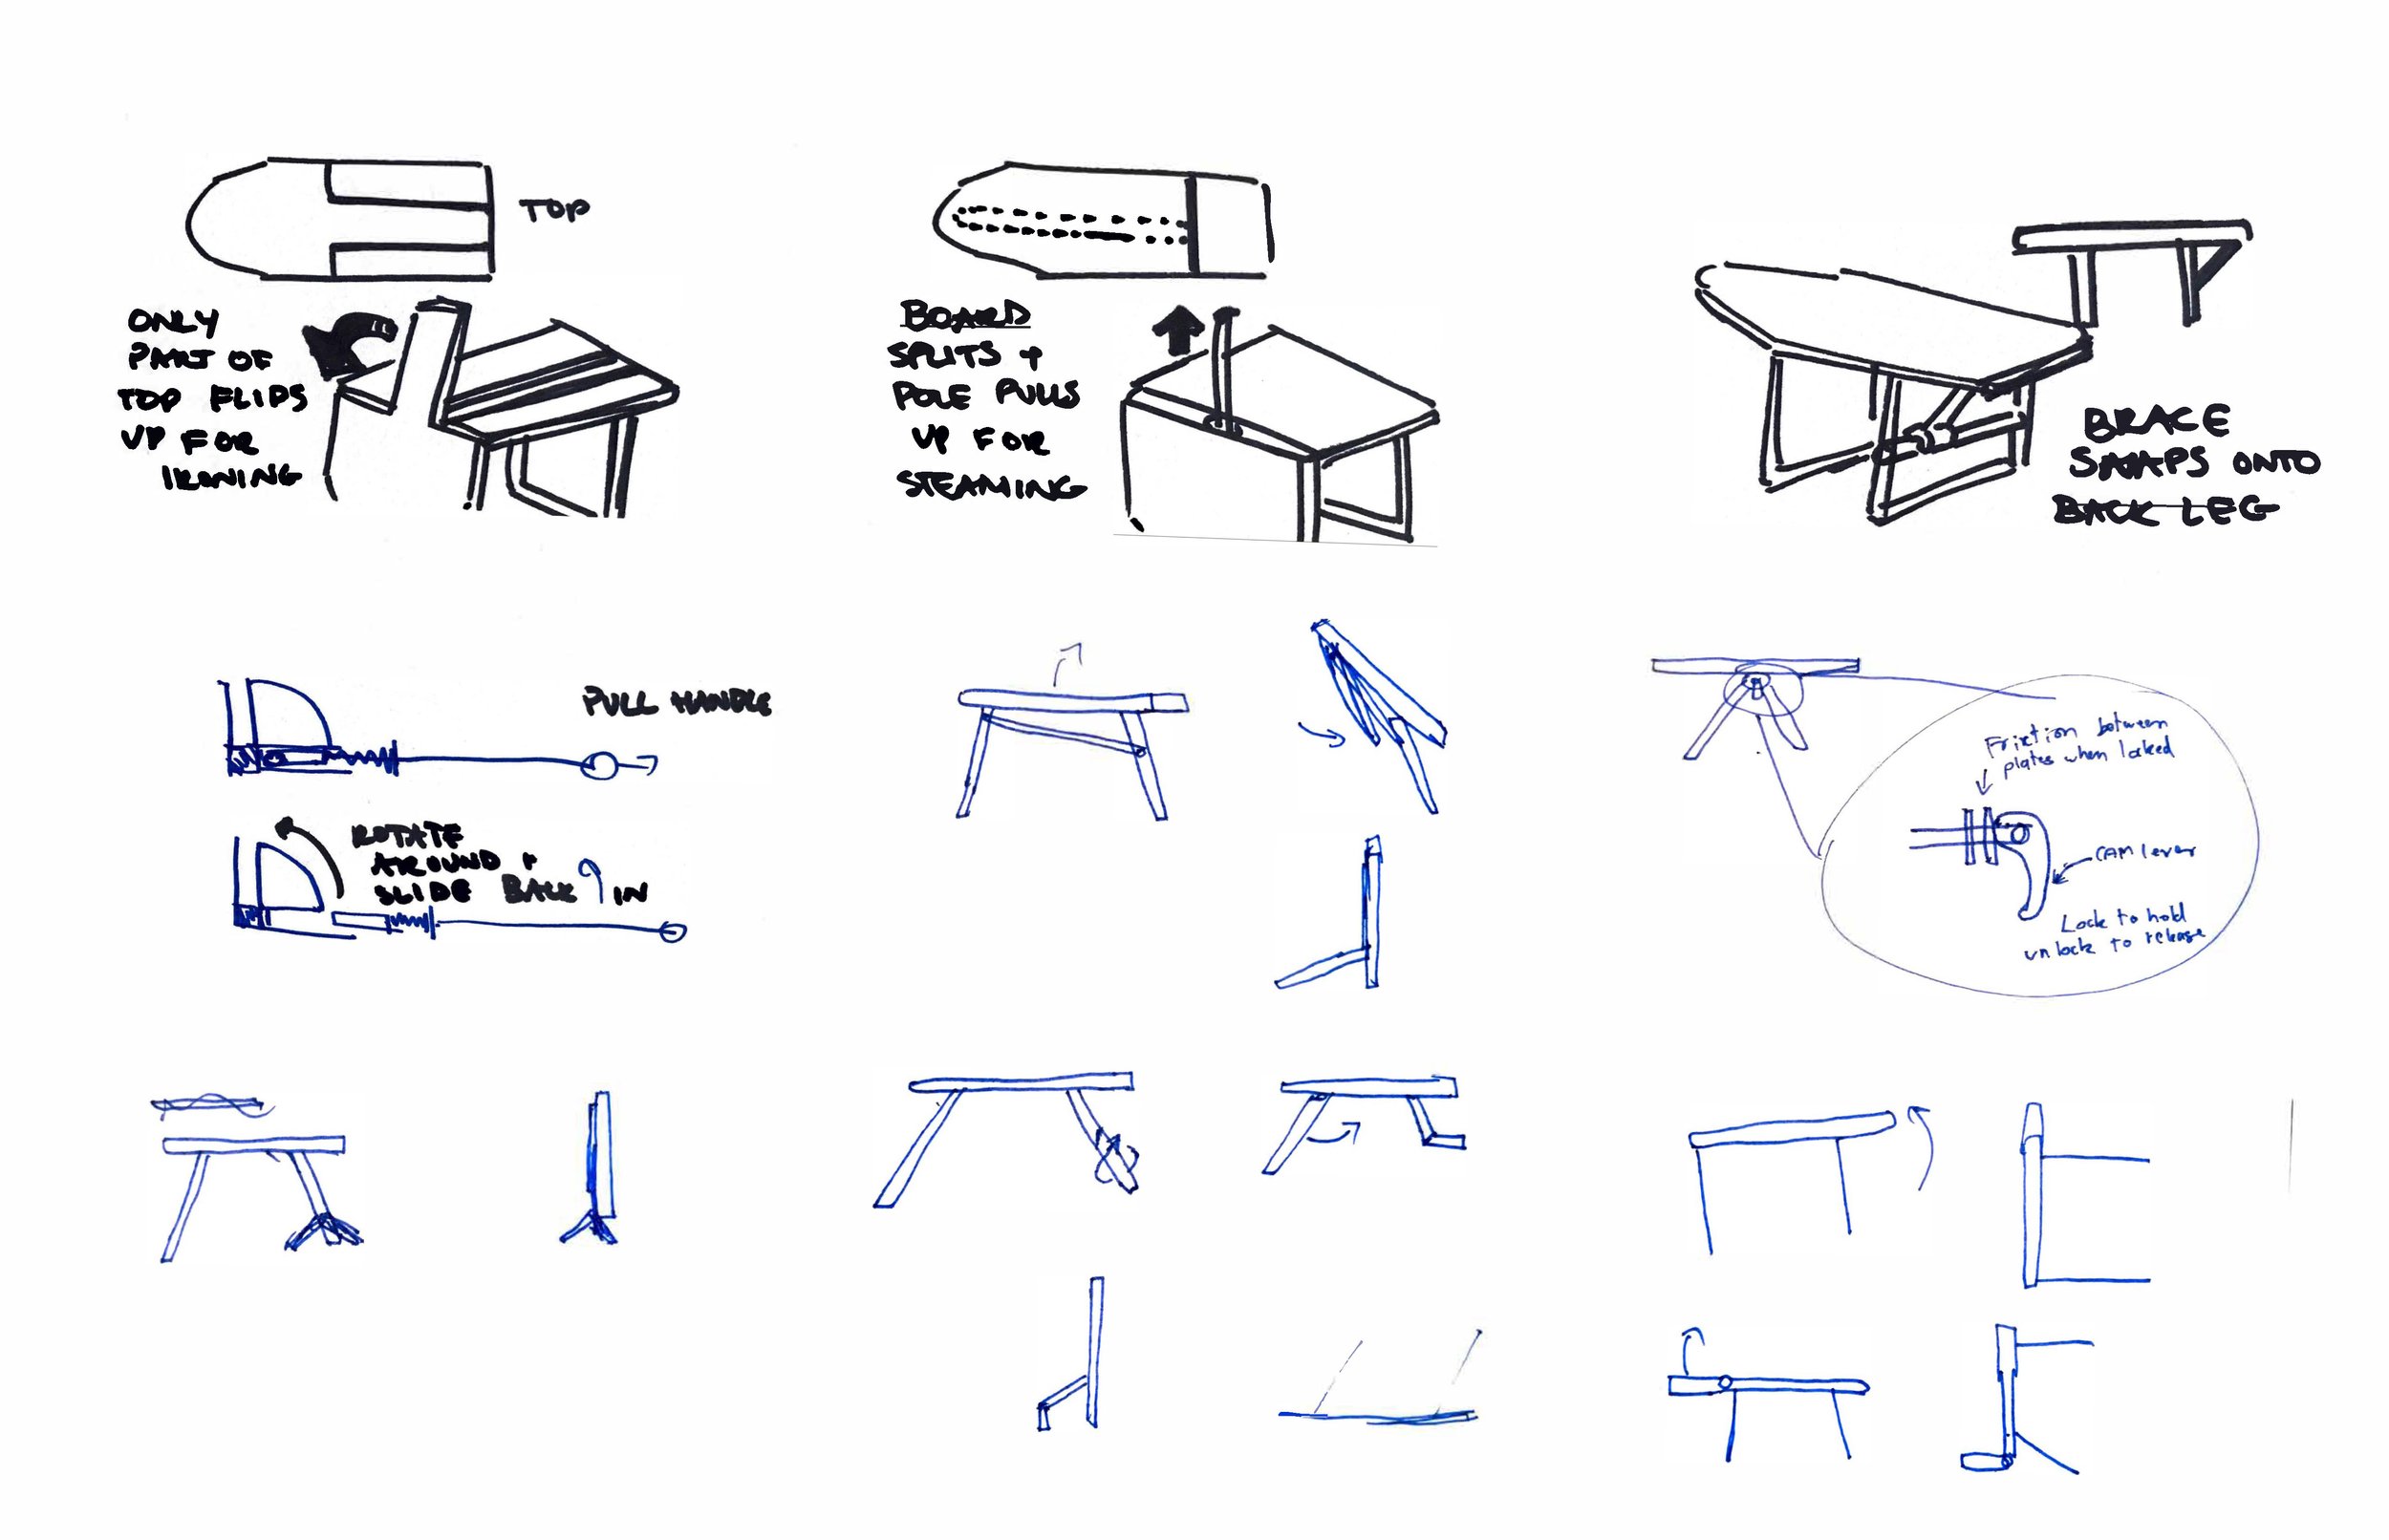 20-0504_HPI_Next Gen Ironing Board_Mechanism Exploration_Concepts only_Page_3.jpg